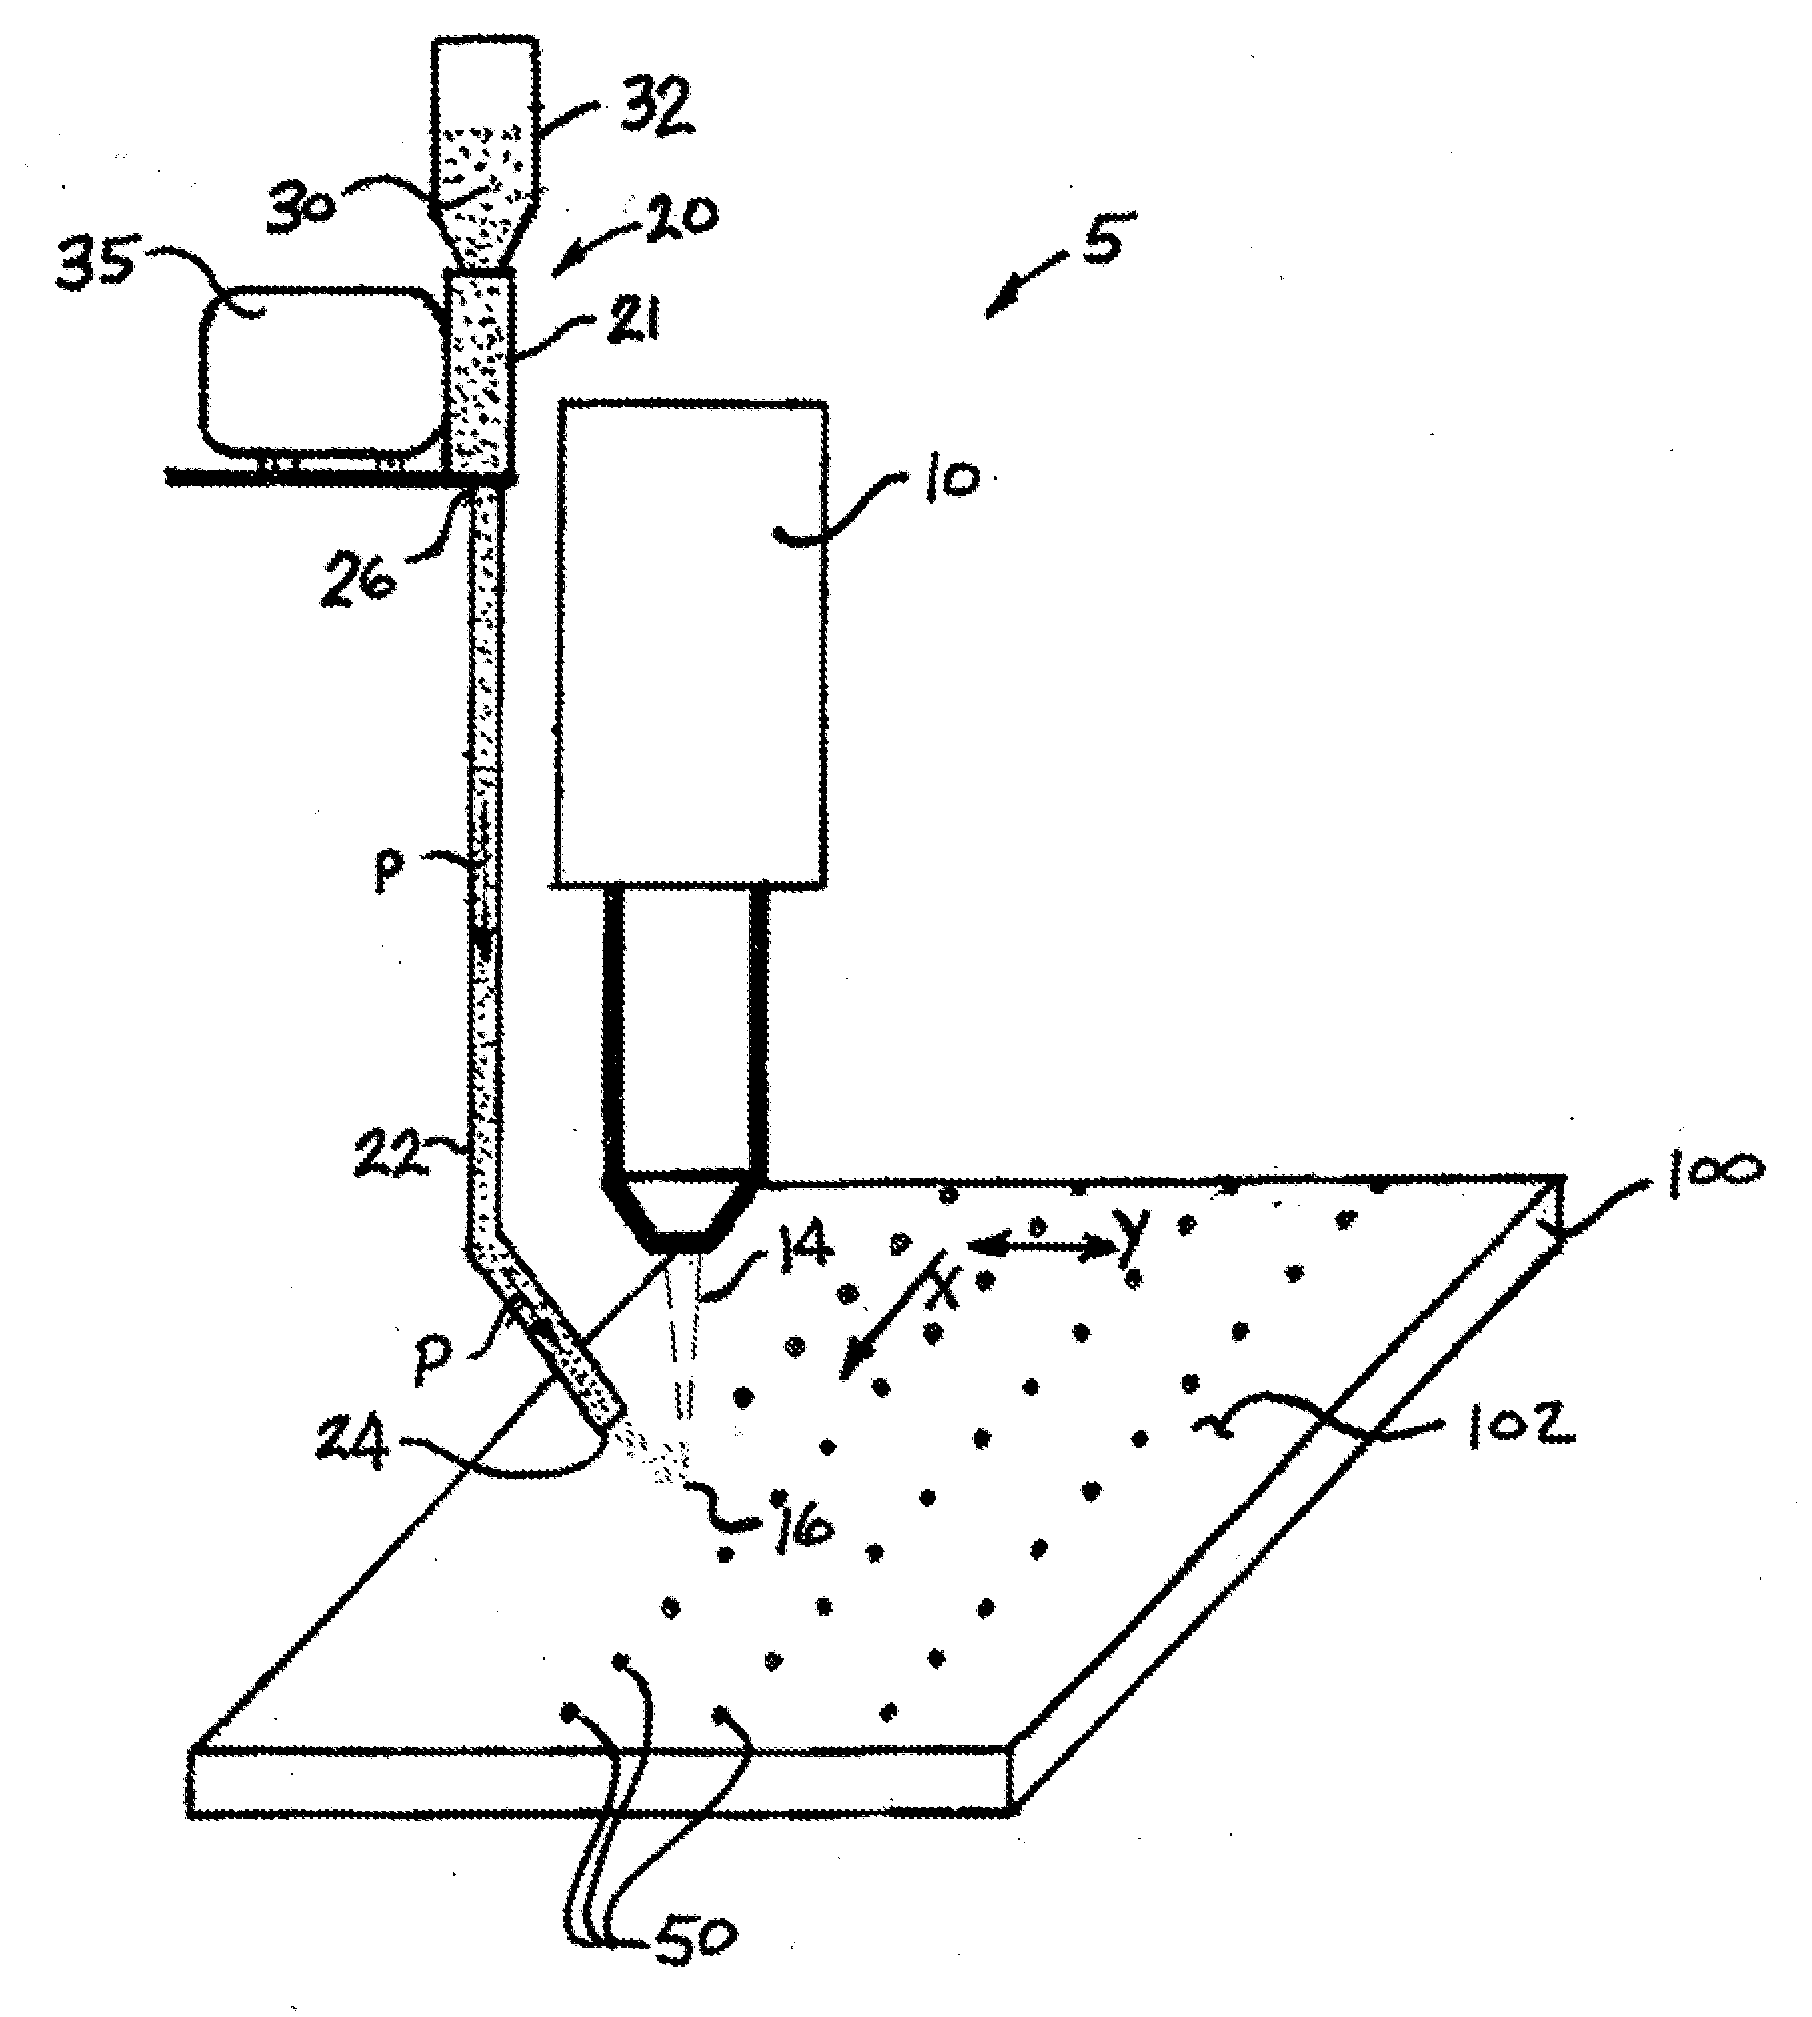 Method and apparatus for depositing raised features at select locations on a substrate to produce a slip-resistant surface